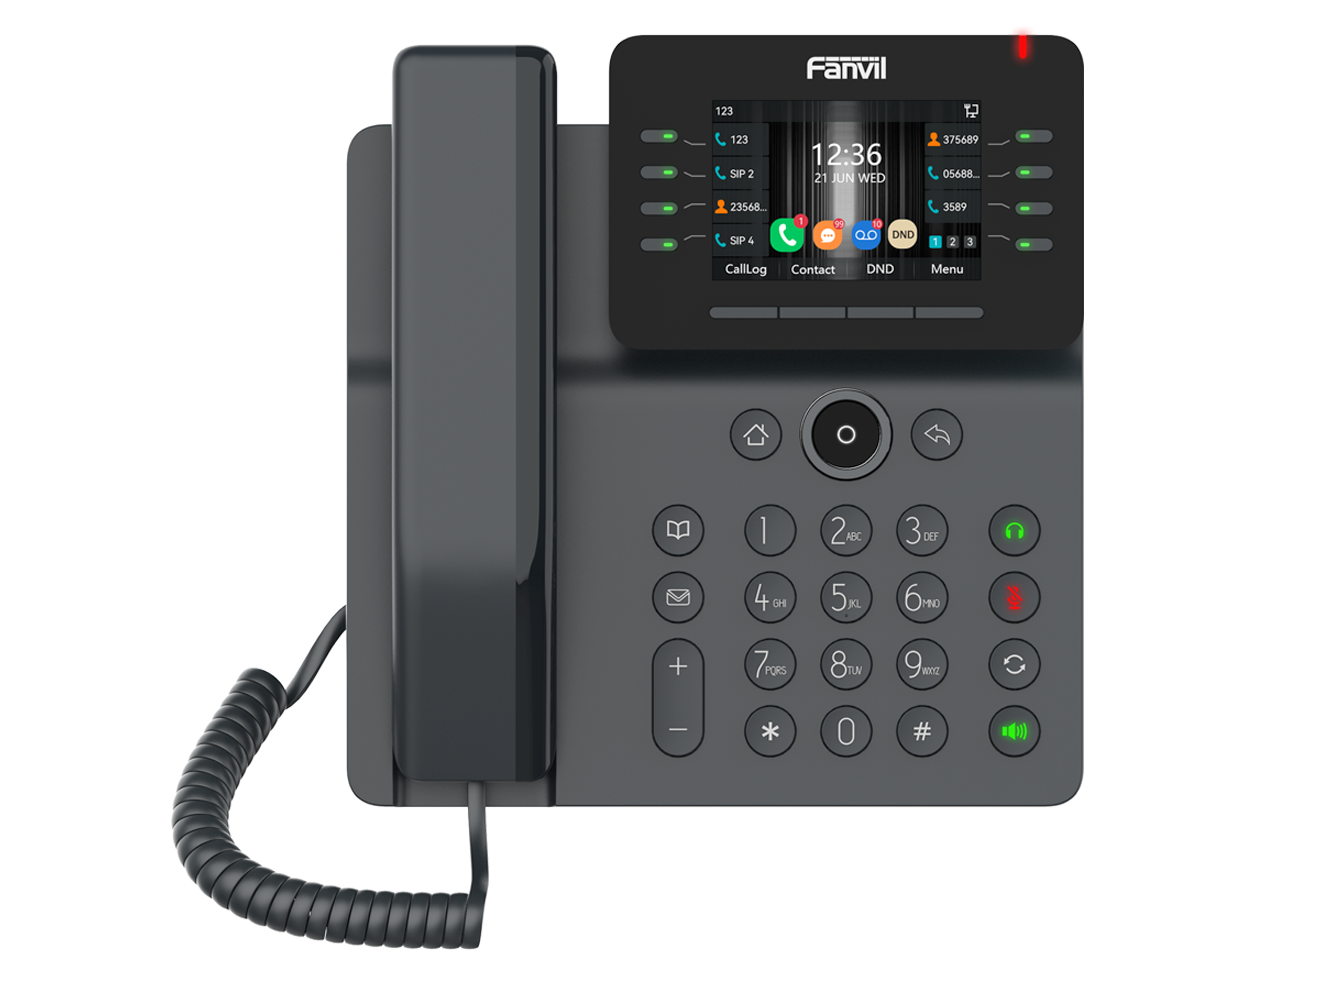 Is it possible to connect a wireless headset to the Fanvil V64 Enterprise Phone?